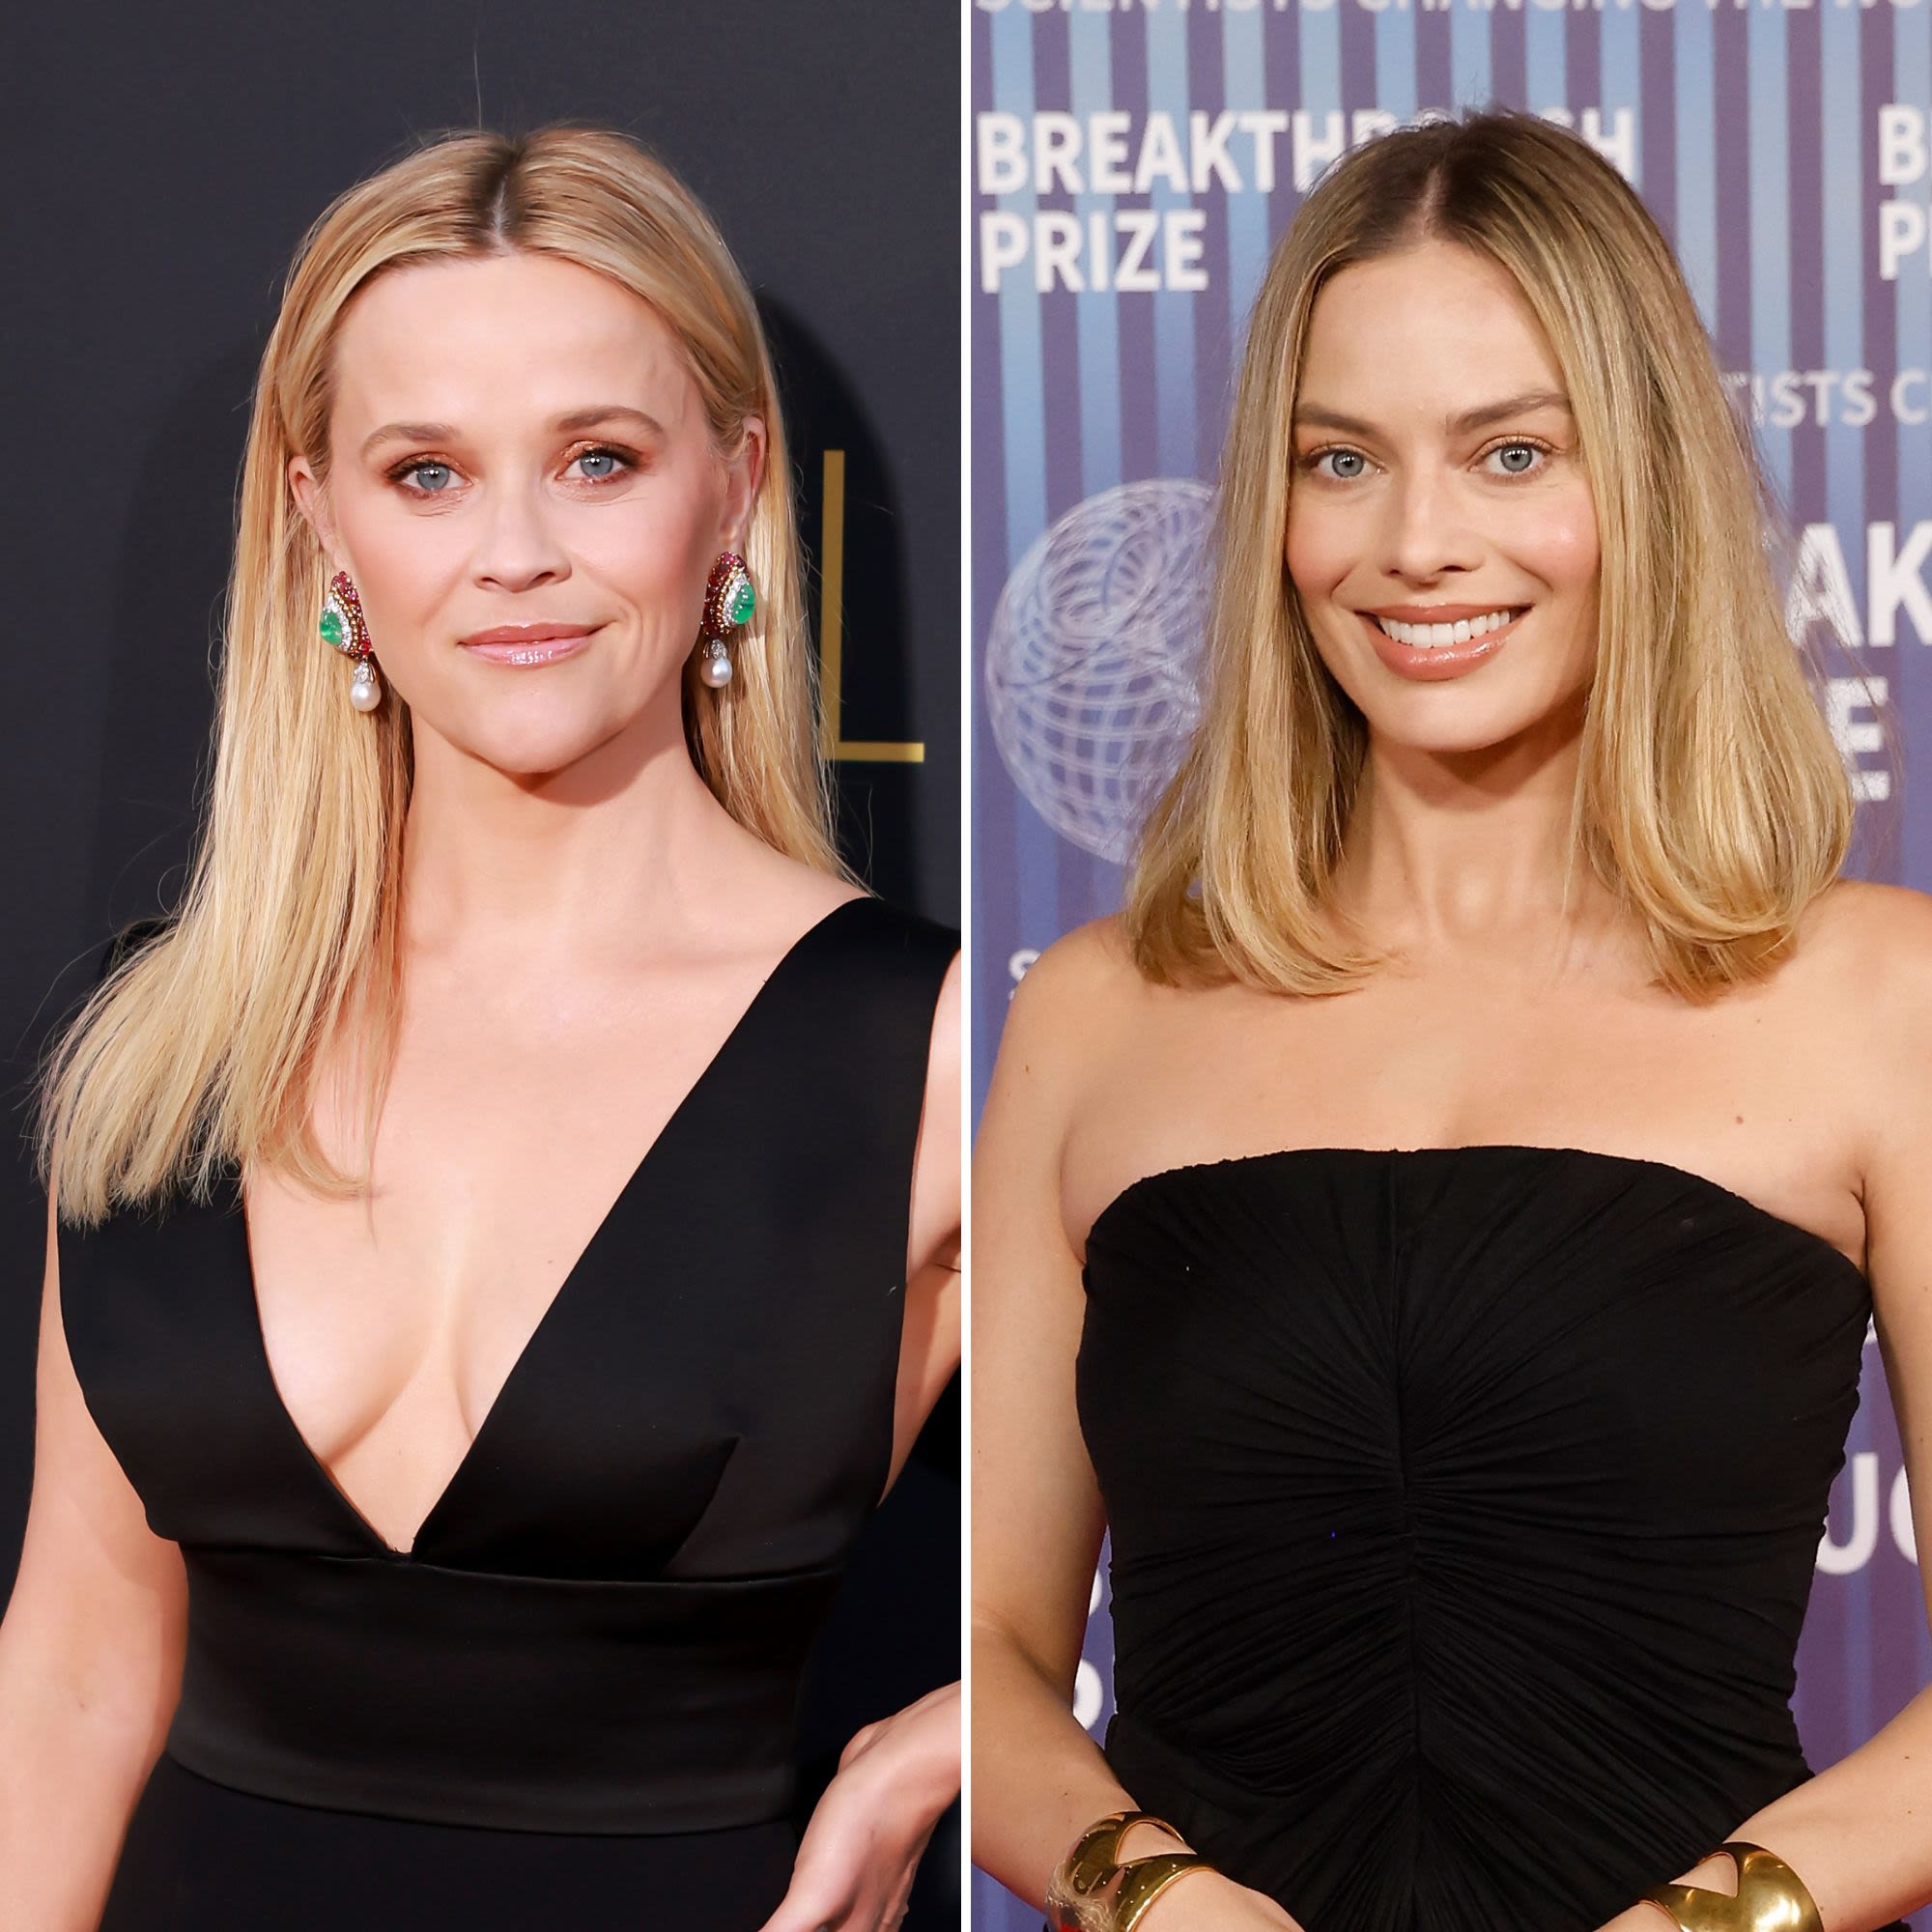 Inside Reese Witherspoon and Margot Robbie’s Secret Feud: ‘They Are in Direct Opposition’